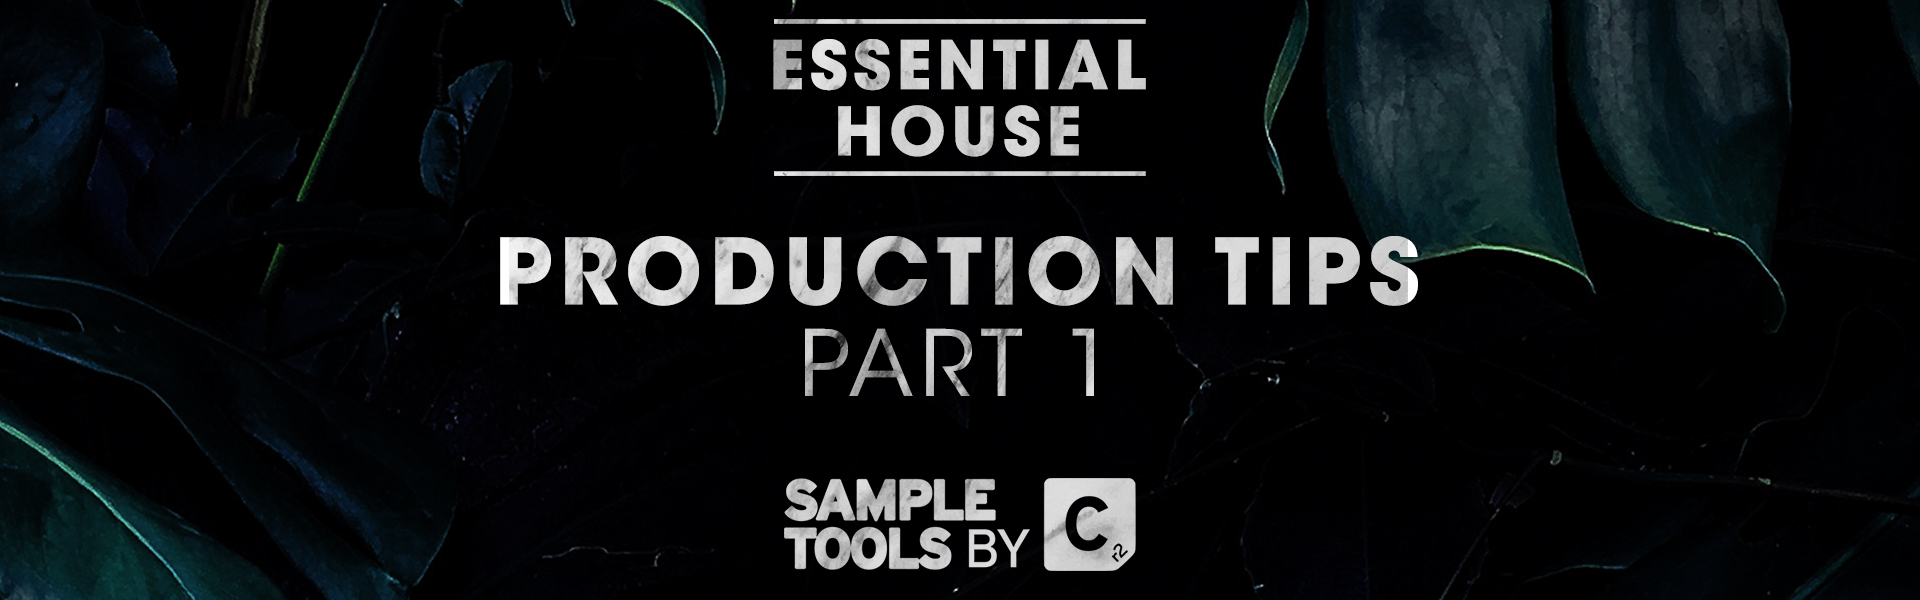 ESSENTIAL HOUSE: Production Tips Pt. I